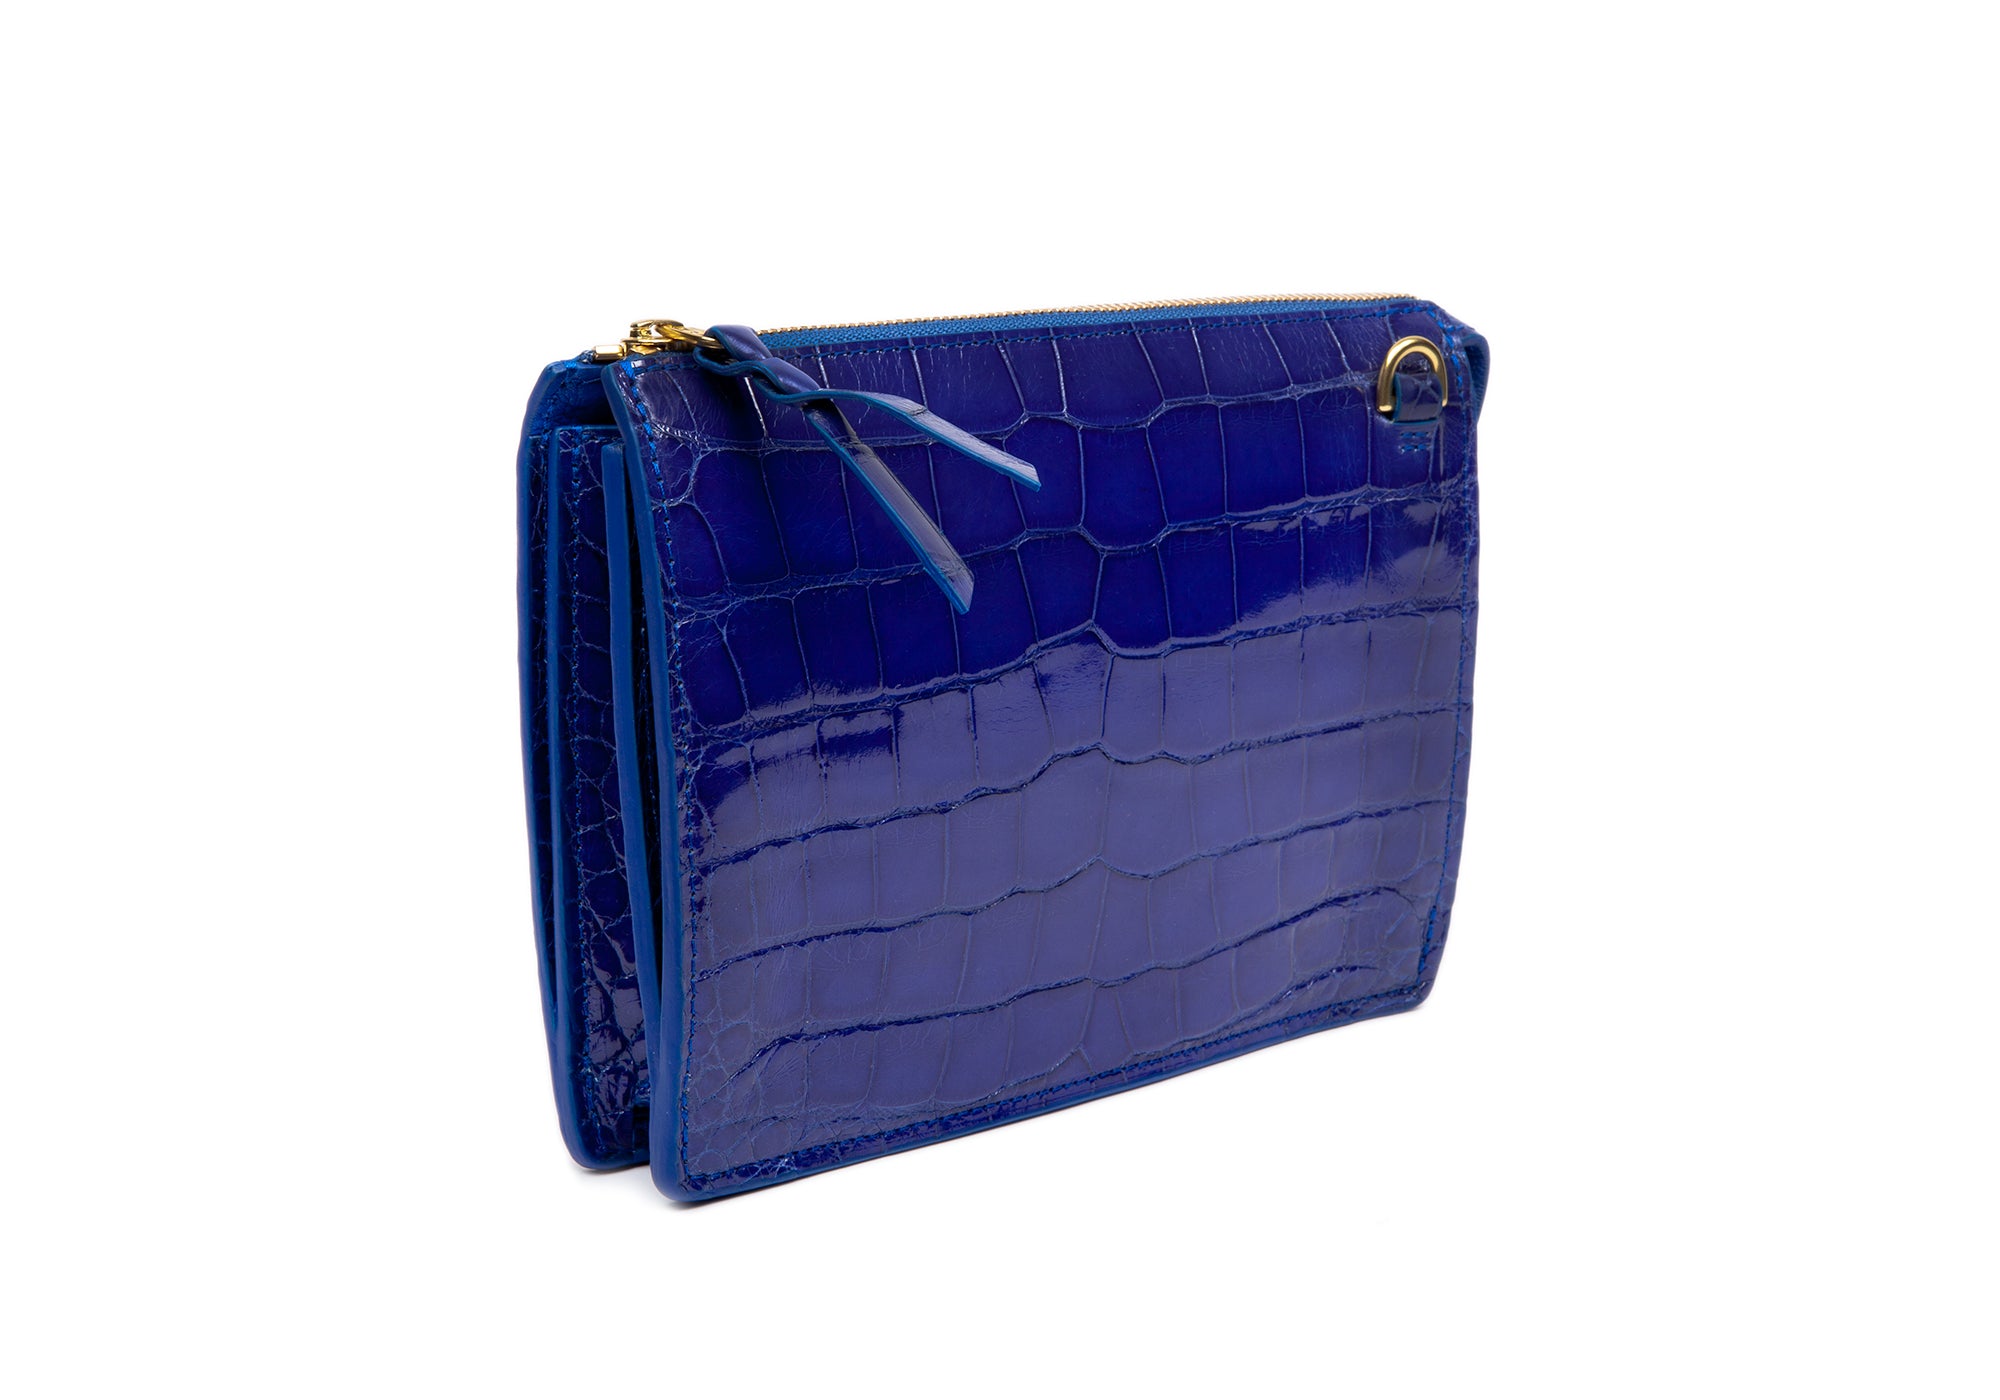 1980s Deep Blue Crocodile or Alligater Stamped Leather Clutch Bag –  Shrimpton Couture